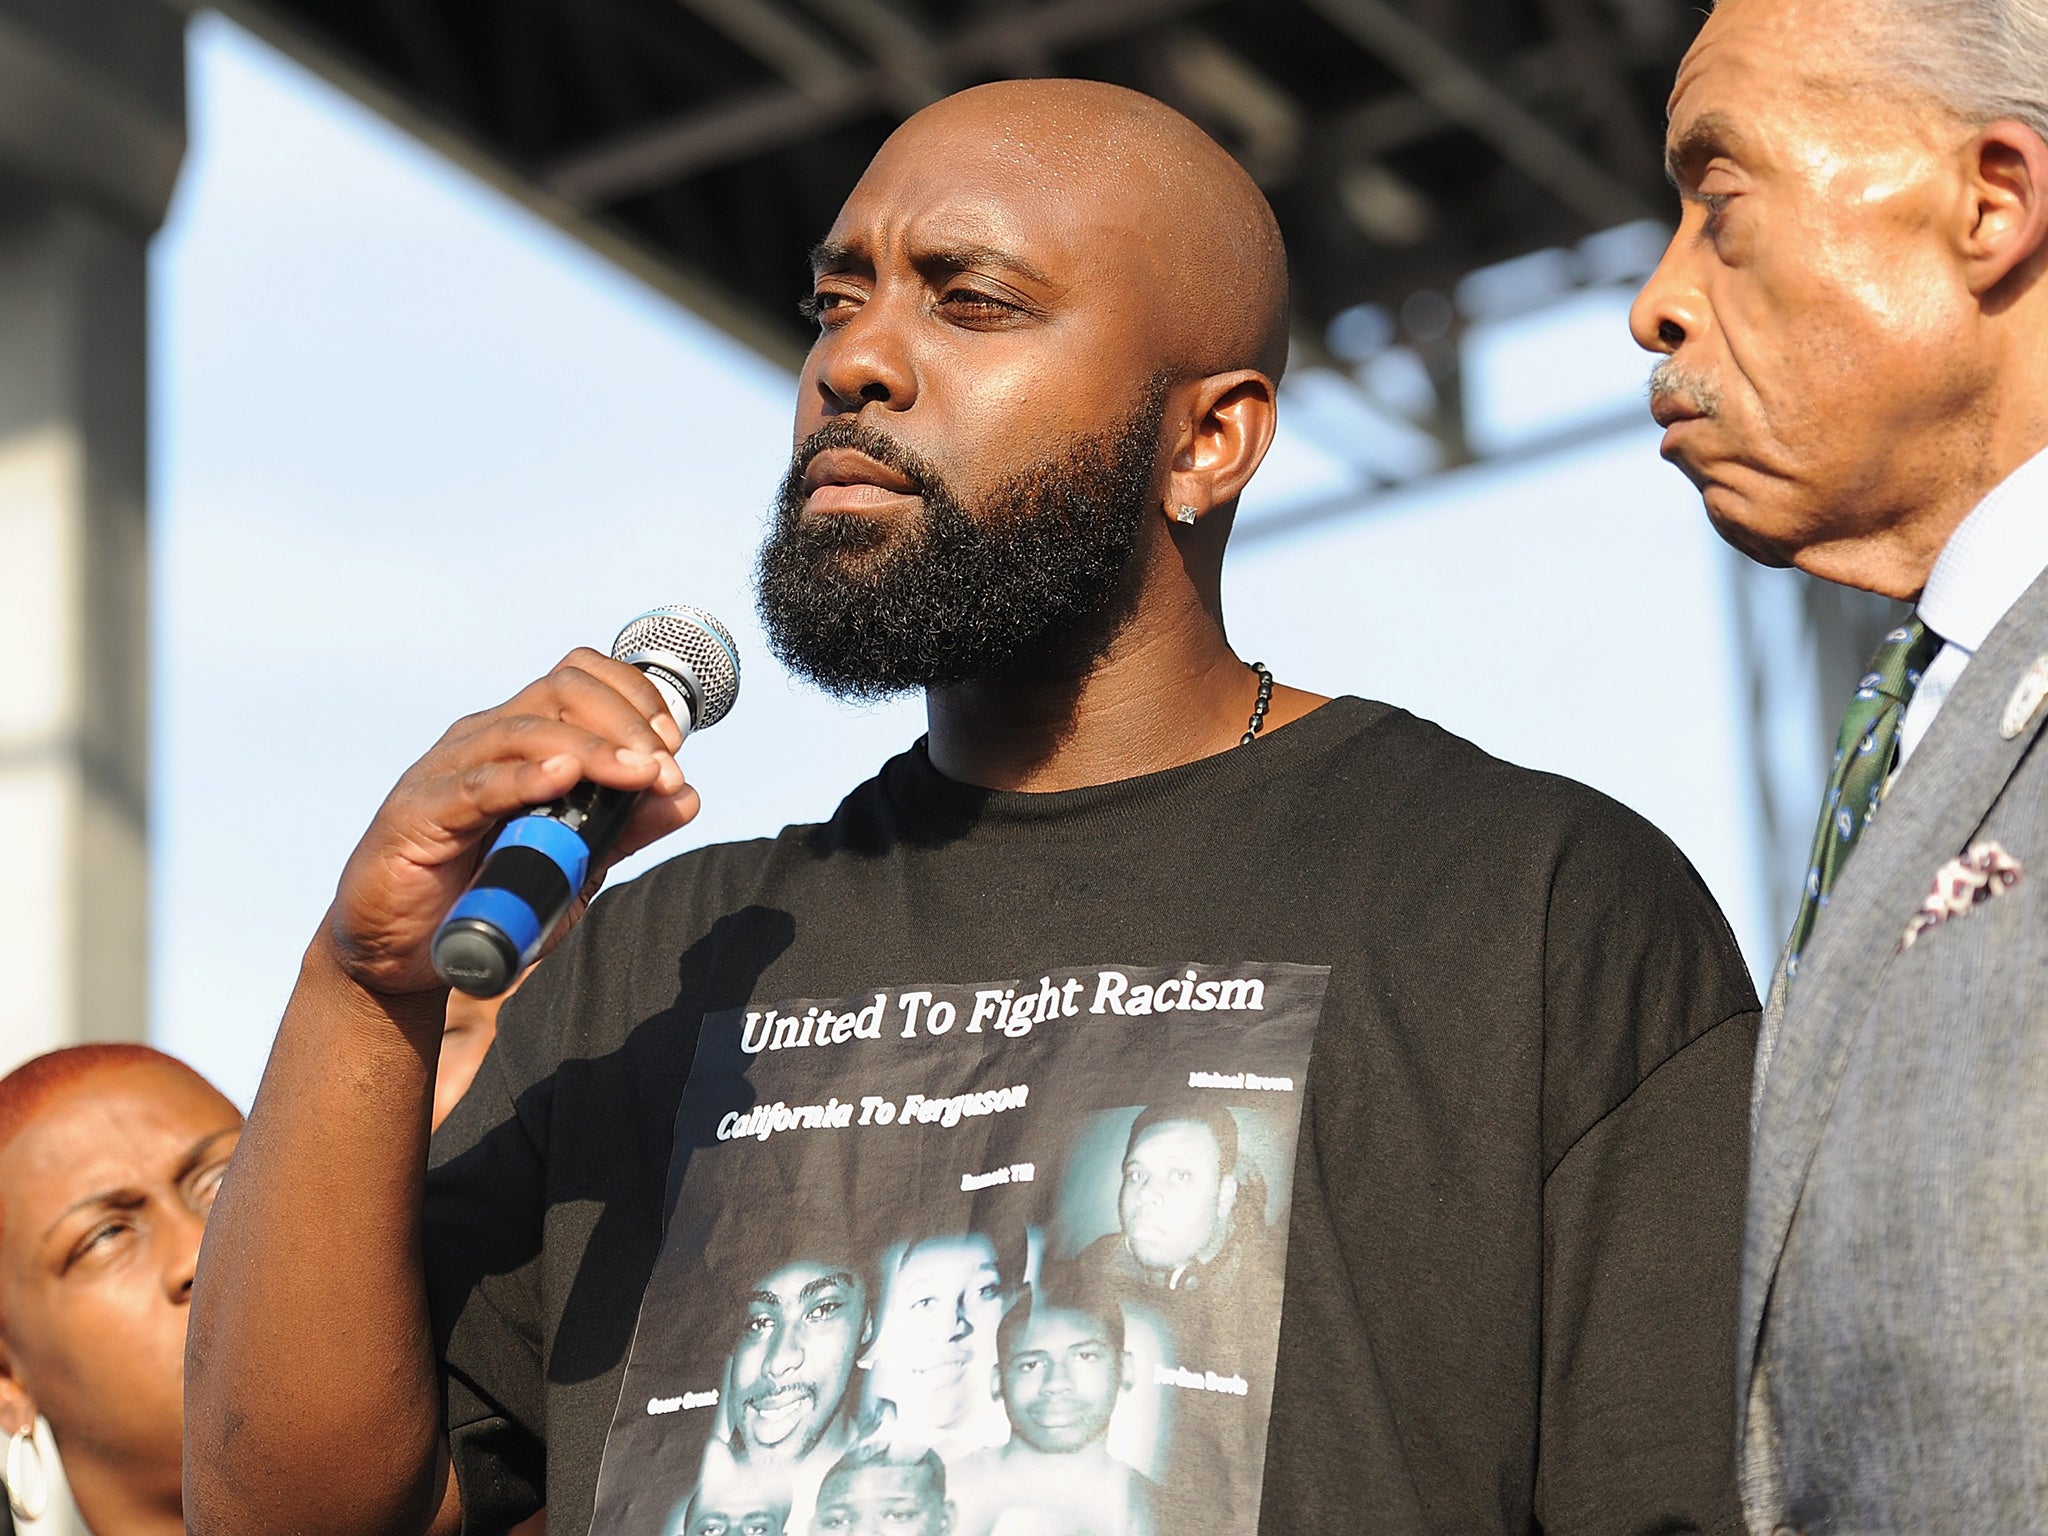 Michael Brown Sr., father of slain teenager Michael Brown Jr., speaks to the crowd during Peacefest, hosted by Better Family Life and the Trayvon Martin Foundation in St. Louis, Missouri on August 24, 2014. The festival is held in support for the family